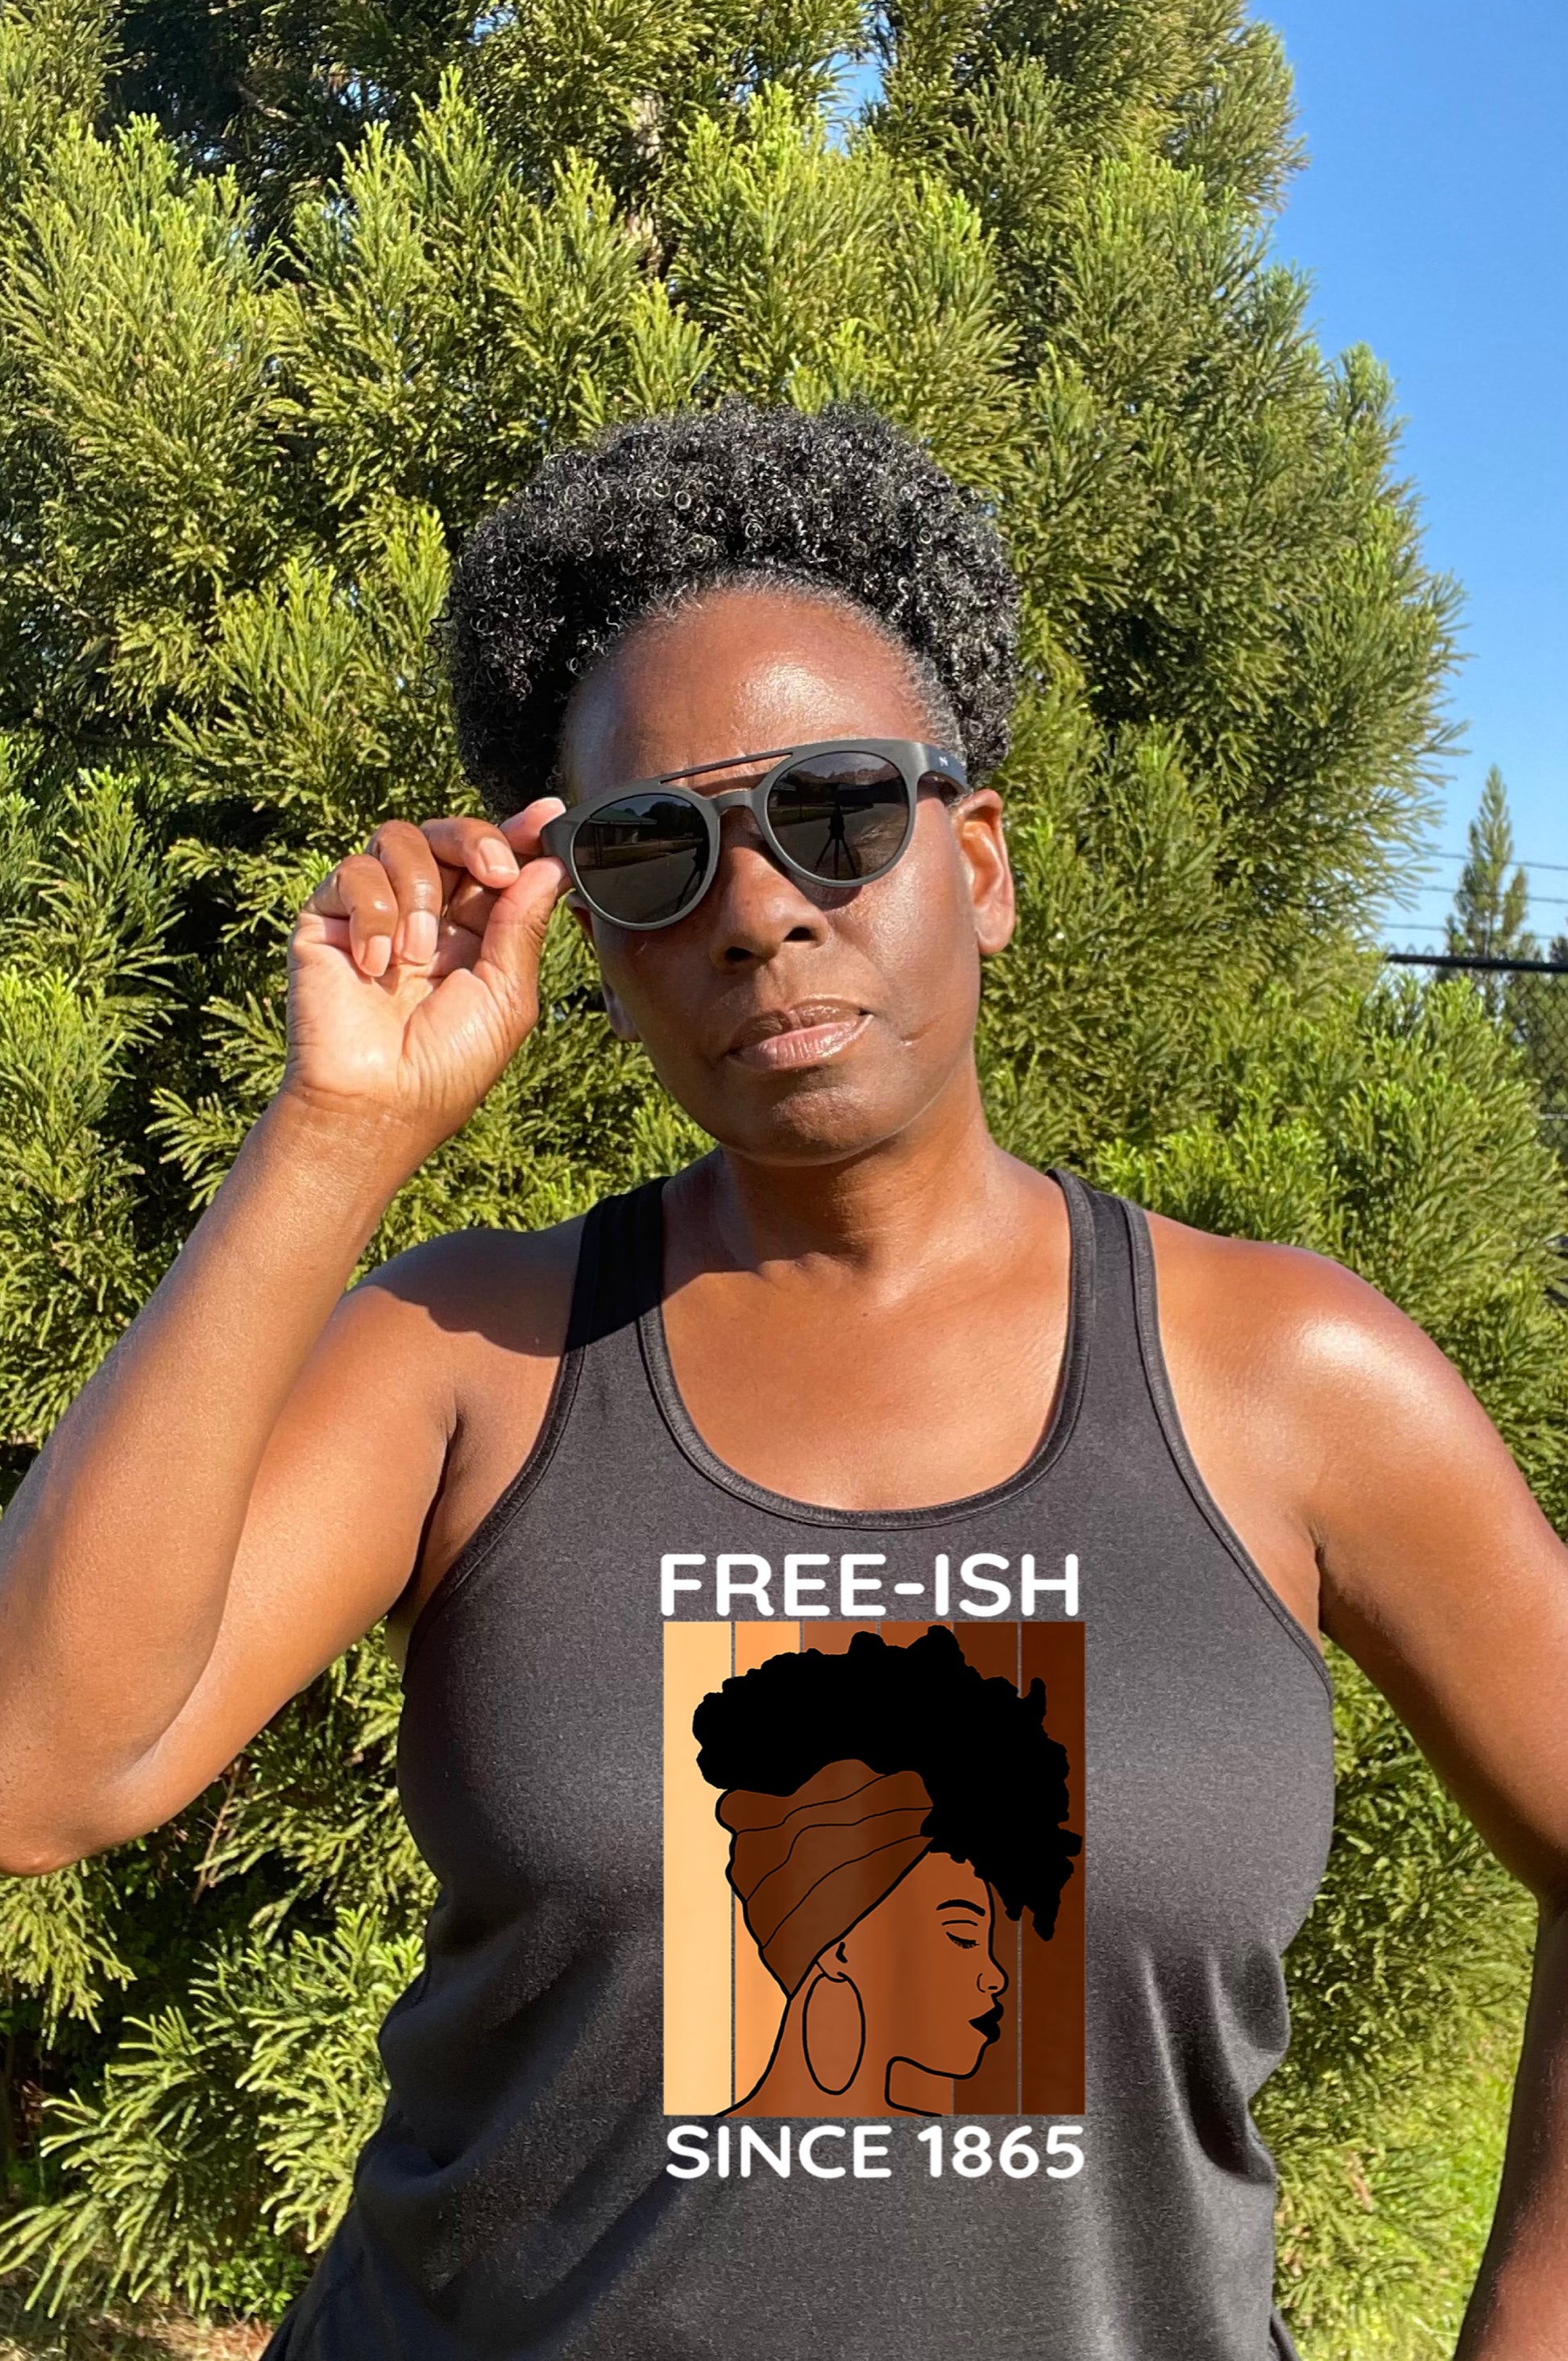 FREE-ISH RCERBACK TANK TOP FOR JUNETEENTH